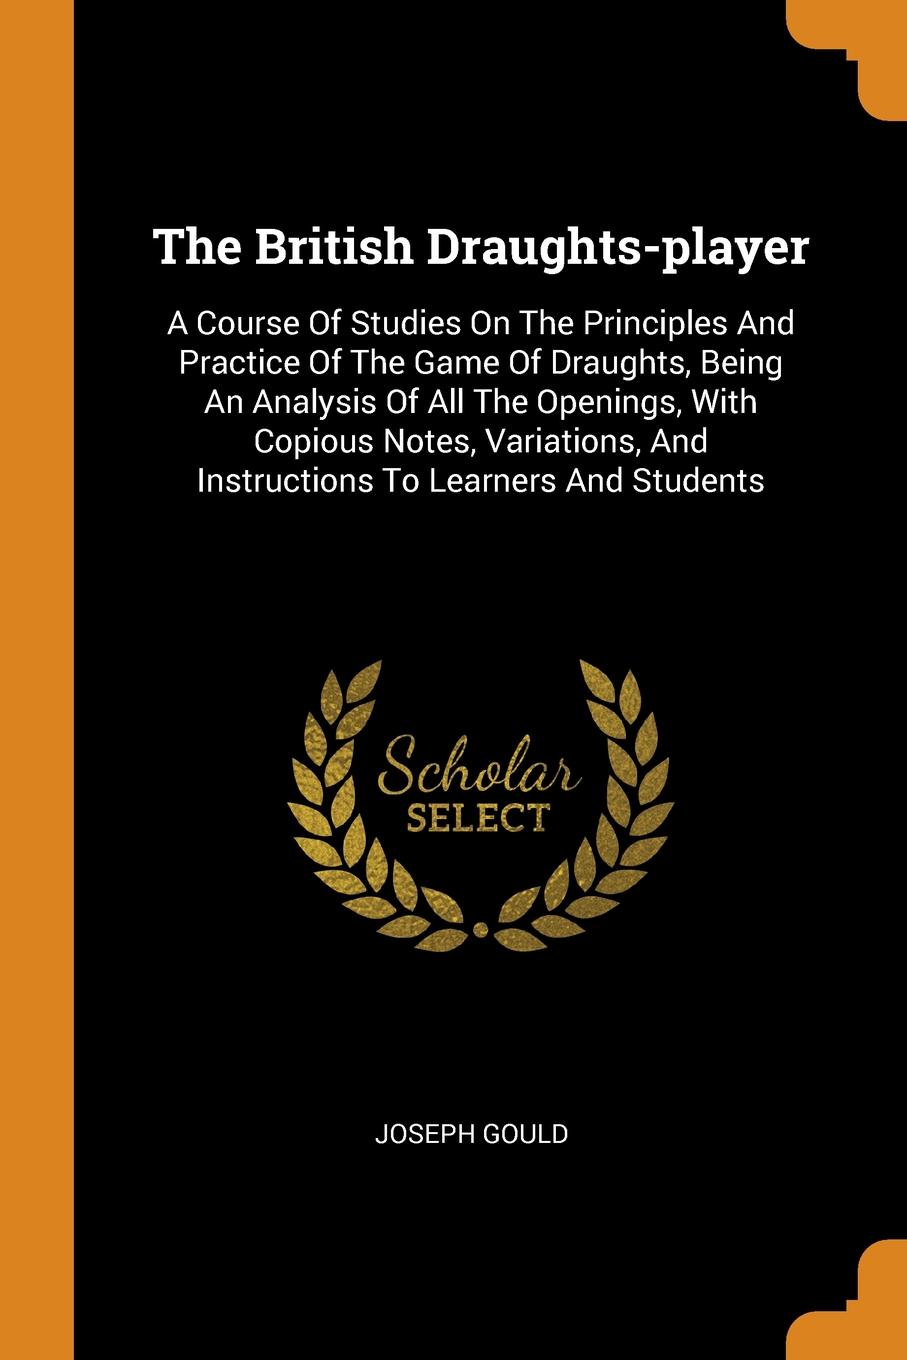 The British Draughts-player. A Course Of Studies On The Principles And Practice Of The Game Of Draughts, Being An Analysis Of All The Openings, With Copious Notes, Variations, And Instructions To Learners And Students